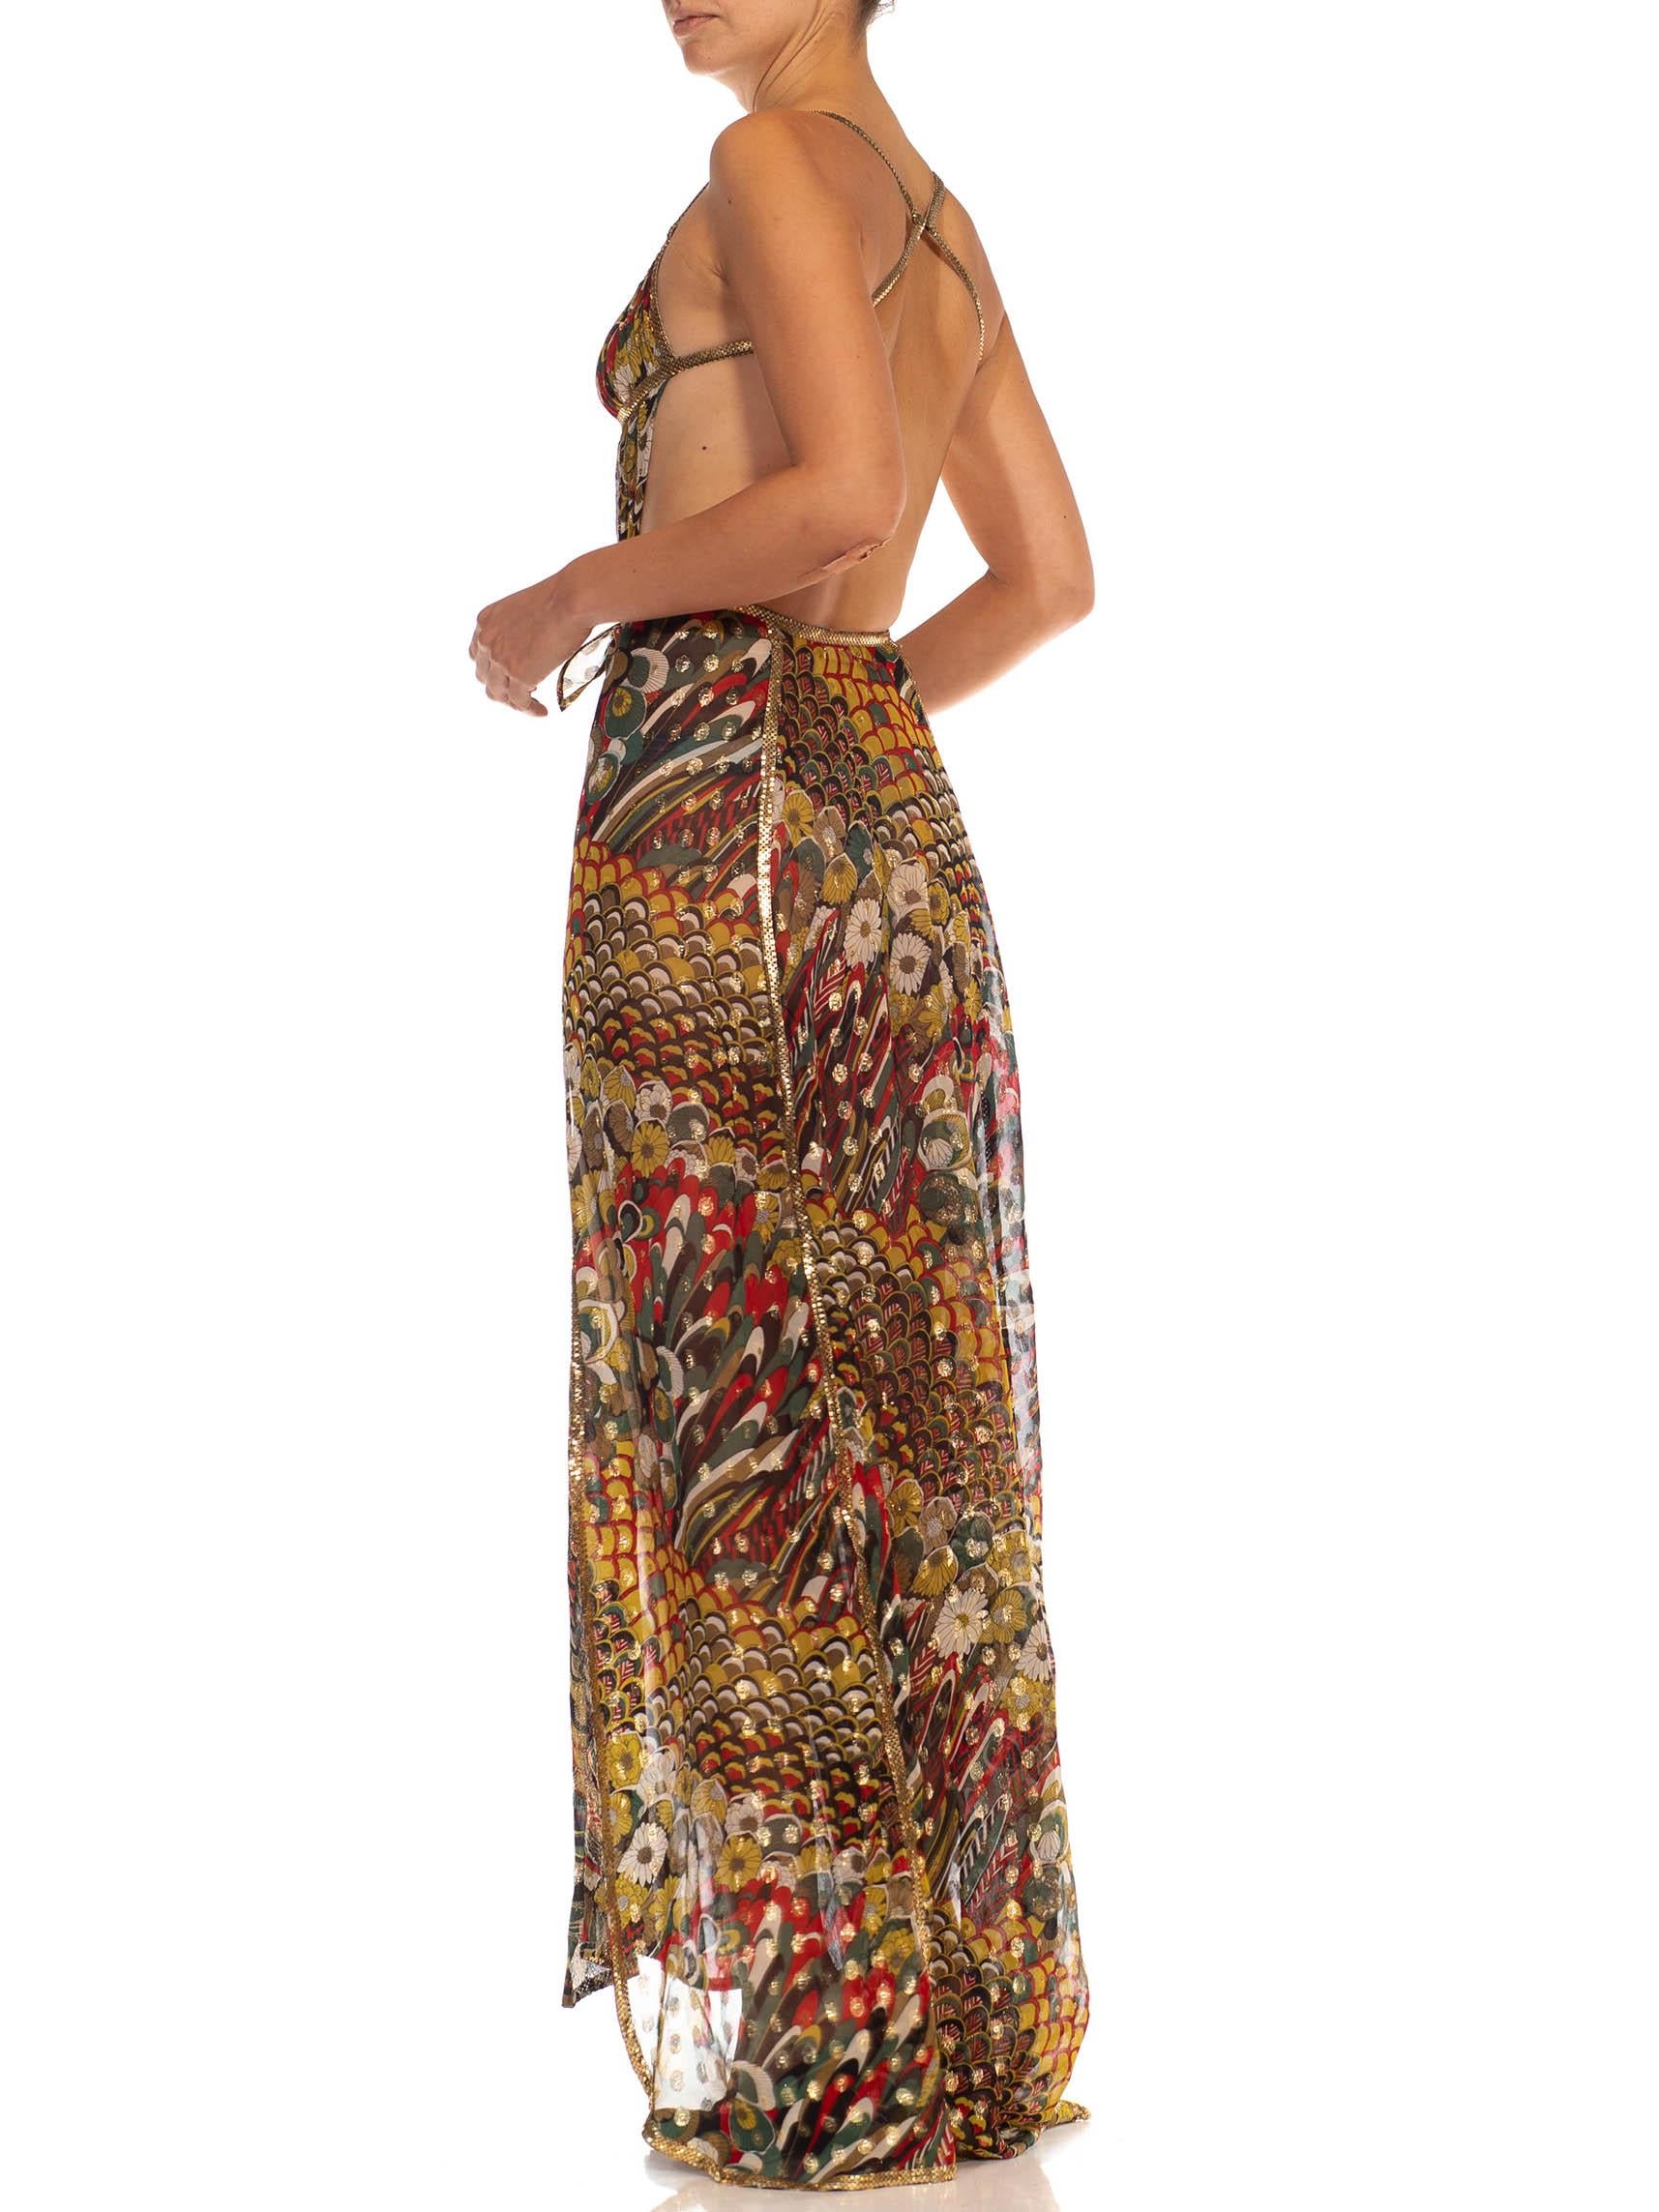 Morphew Collection Green, Red & Gold Lamé Silk Chiffon Dress With Metal Mesh 1